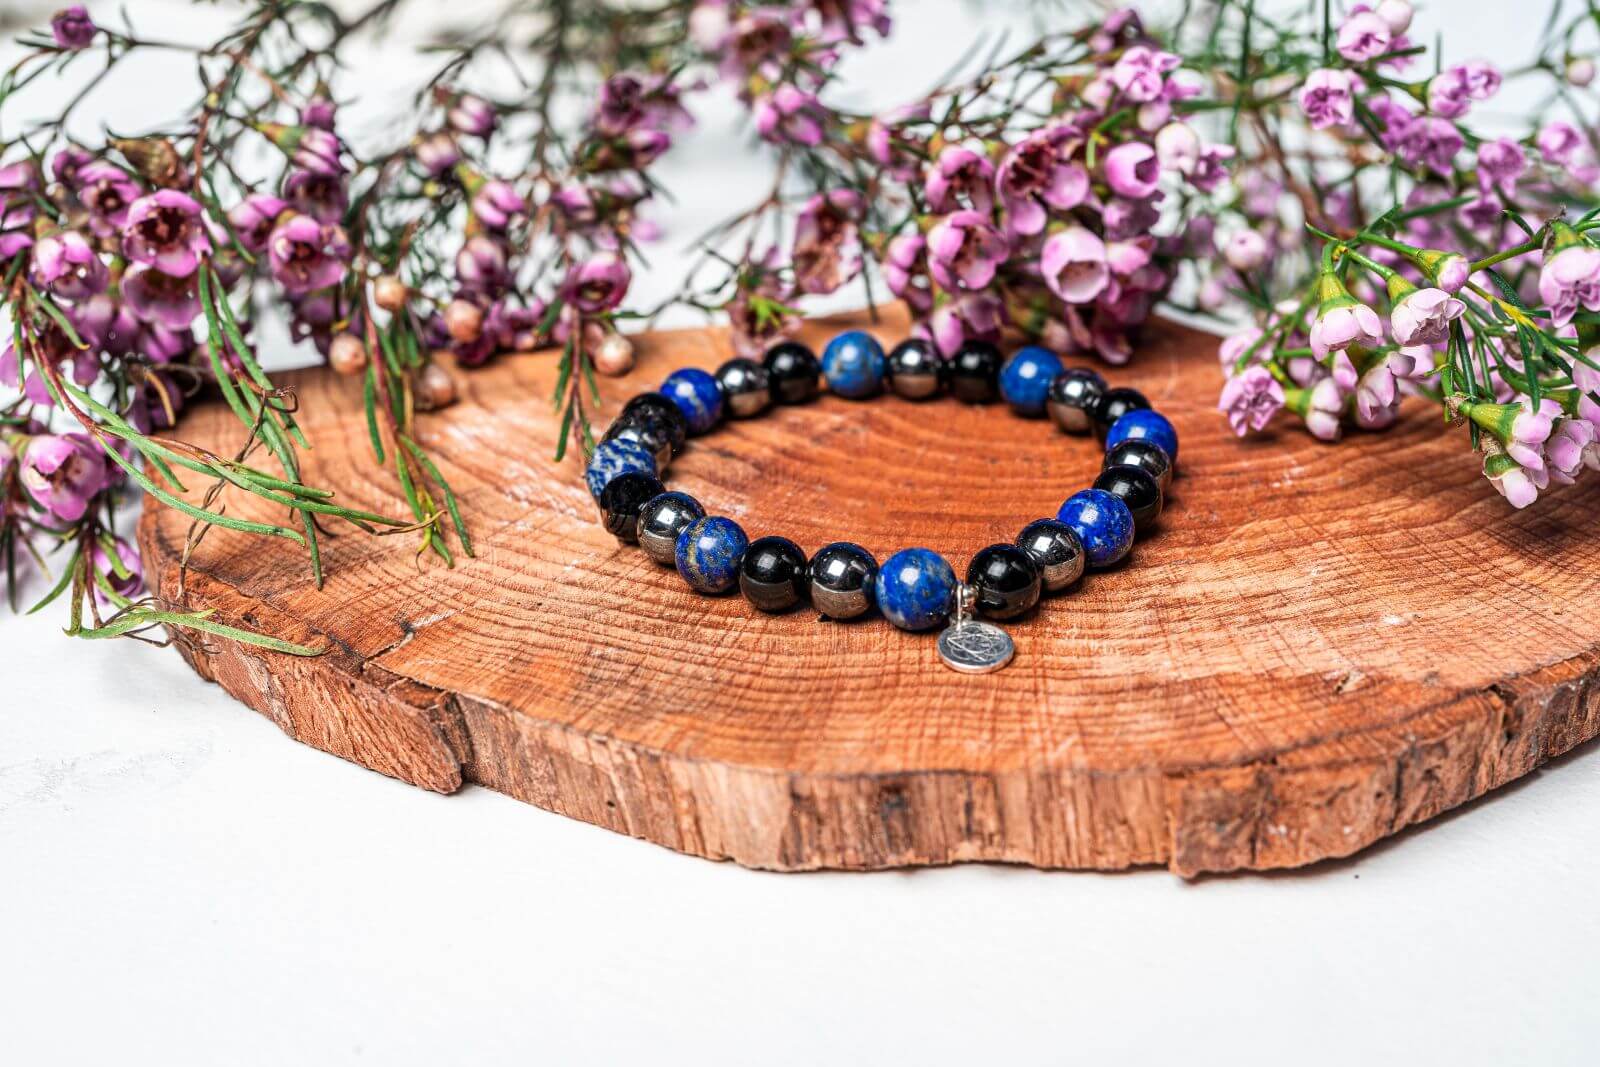 Lapis Lazuli Stone Meanings and Uses